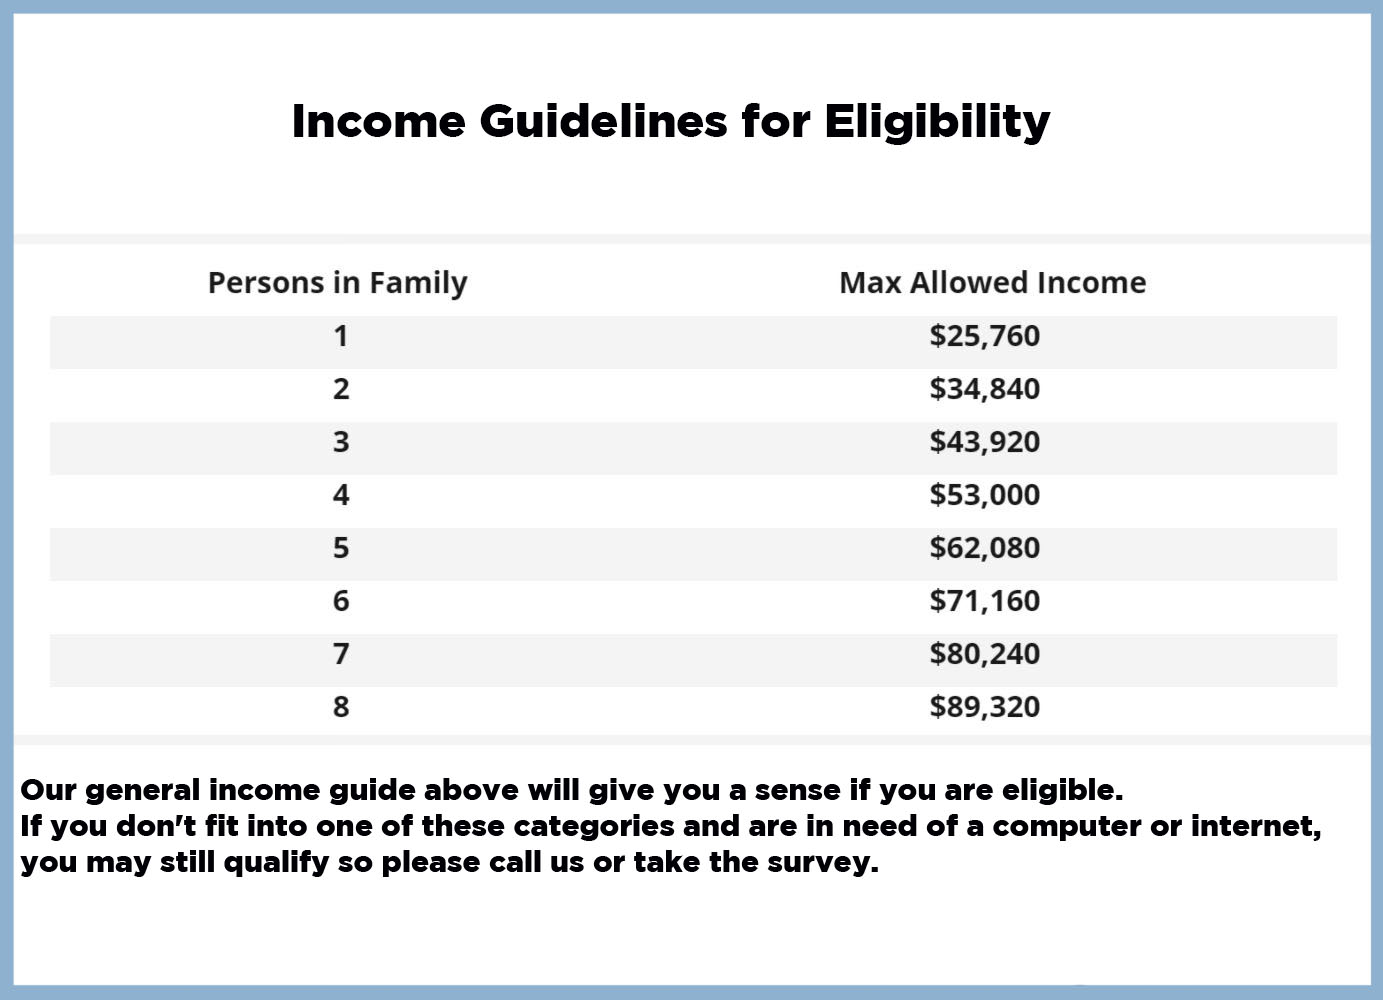 Income Guidelines for Eligibility for PCs for People